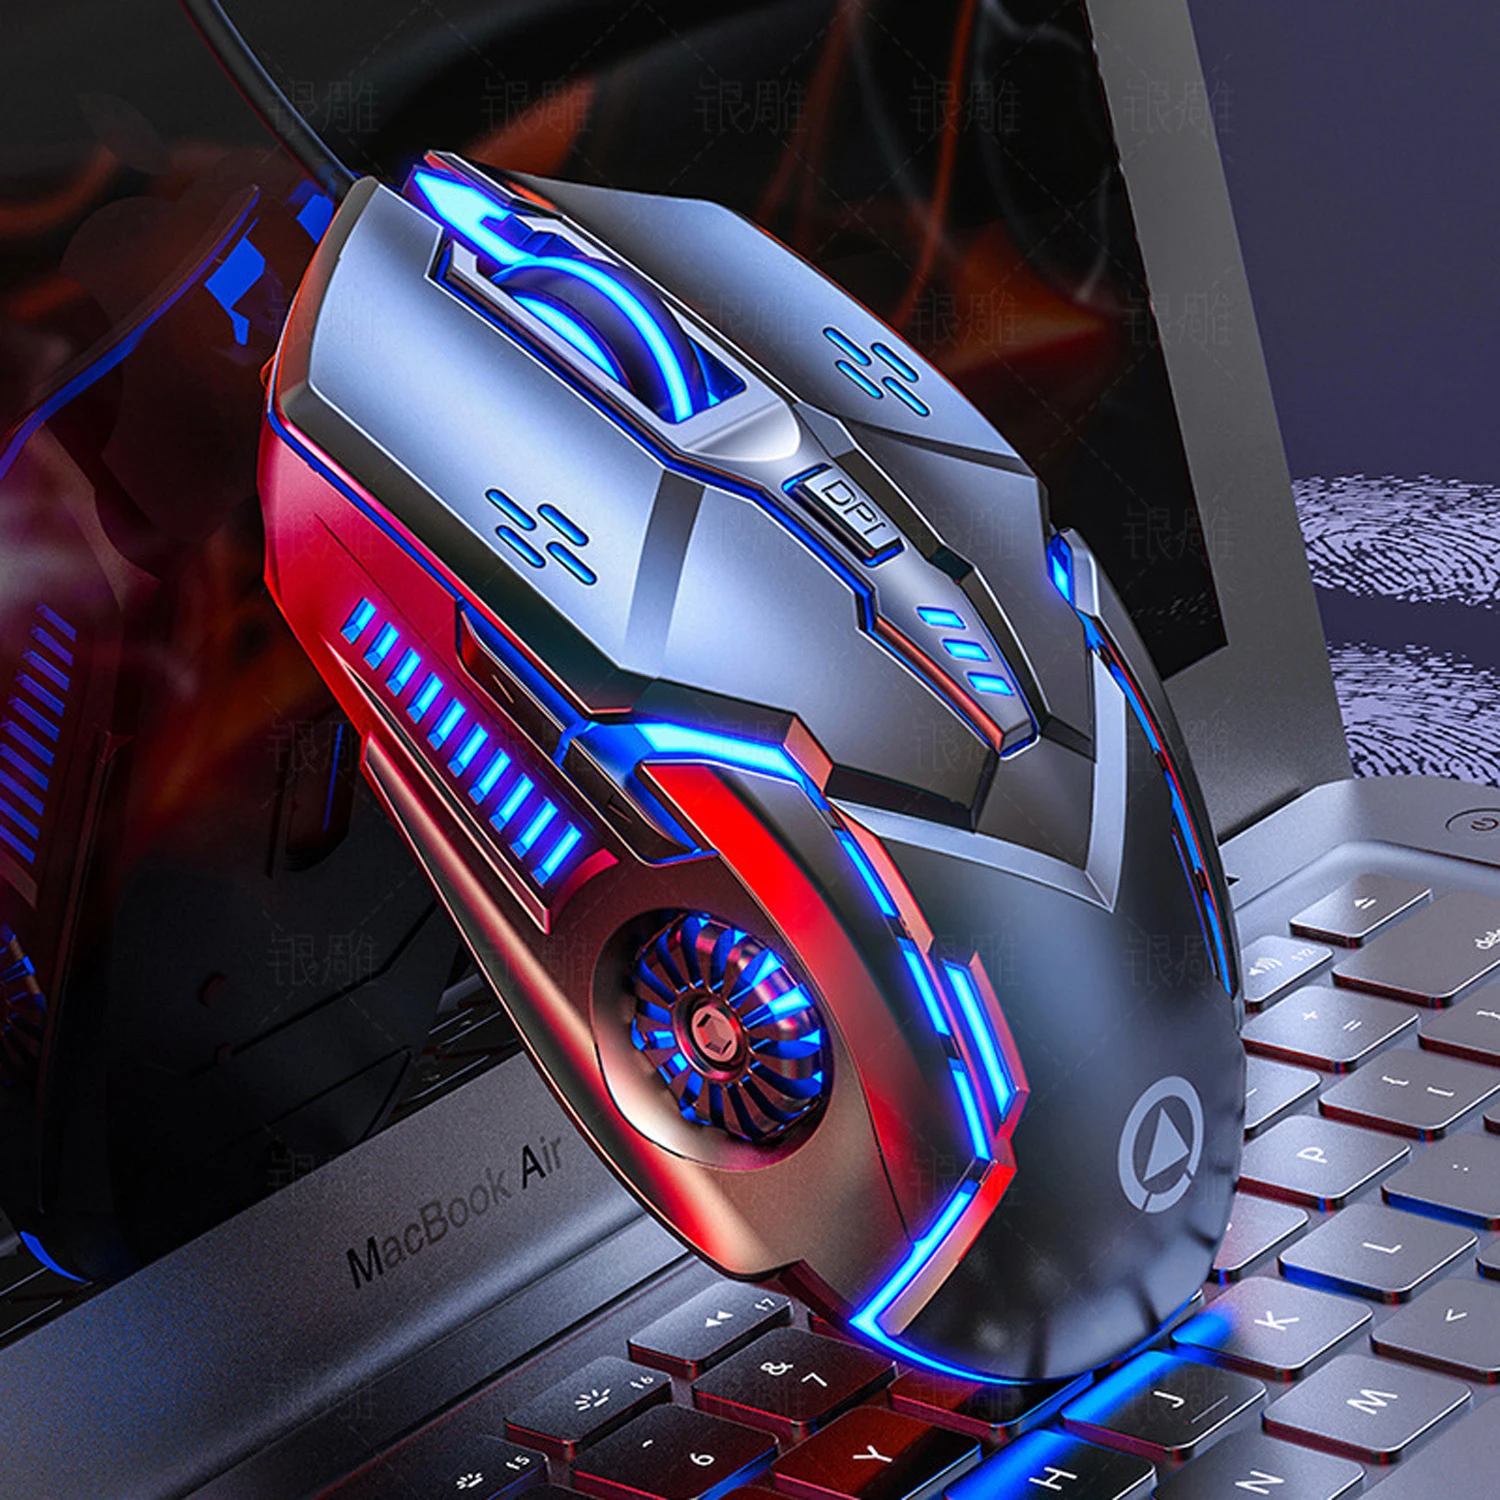 

GAZ-M01 2022 Latest Game Gaming Mouse 7-Color RGB Breathing Led Light Pc Laptop Universal Usb Wired Mouse